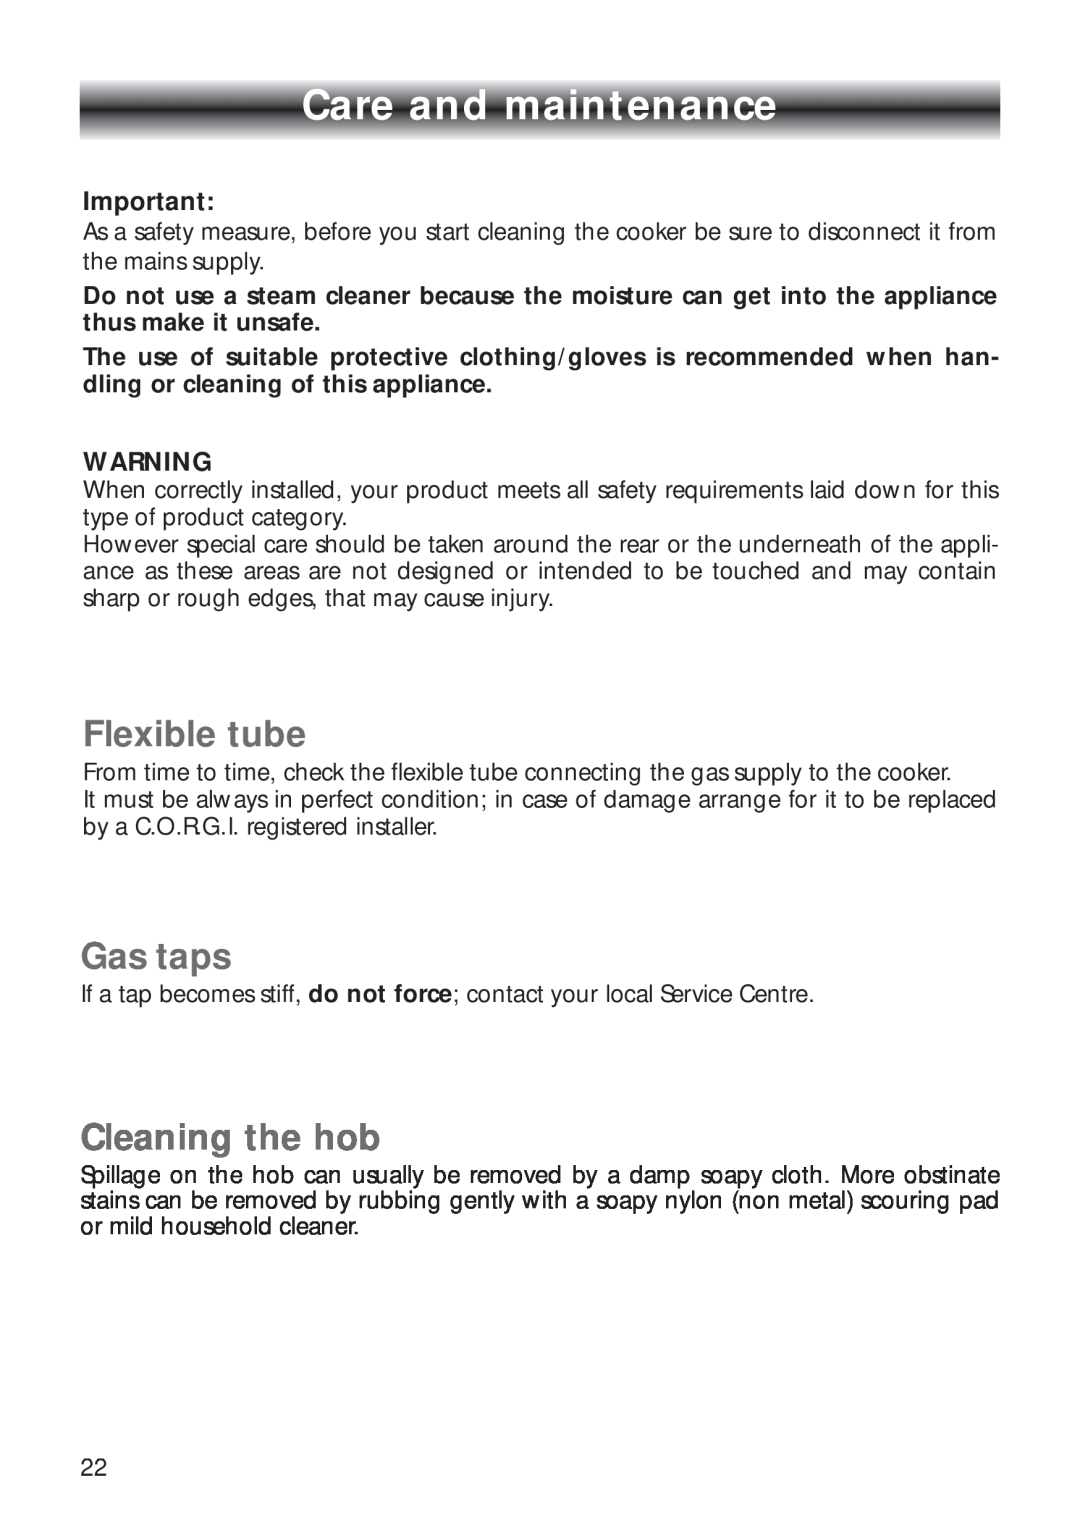 CDA RV 700 installation instructions Care and maintenance, Flexible tube, Gas taps, Cleaning the hob 